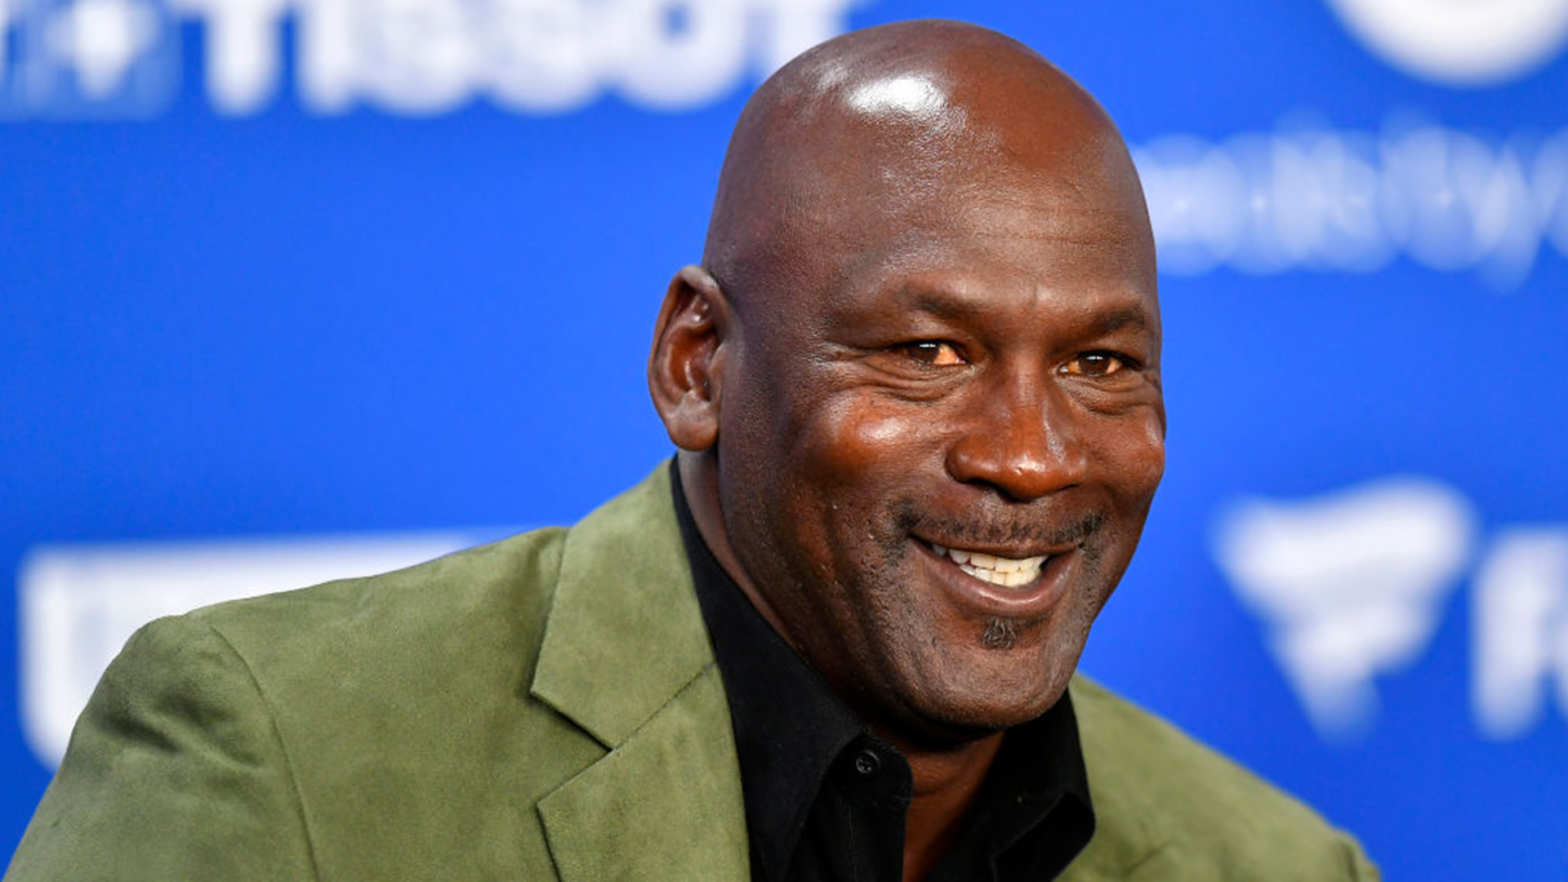 Michael Jordan Shatters His Own Record As Air Jordan 13 'Bred' Sells For A Whopping $2.2M